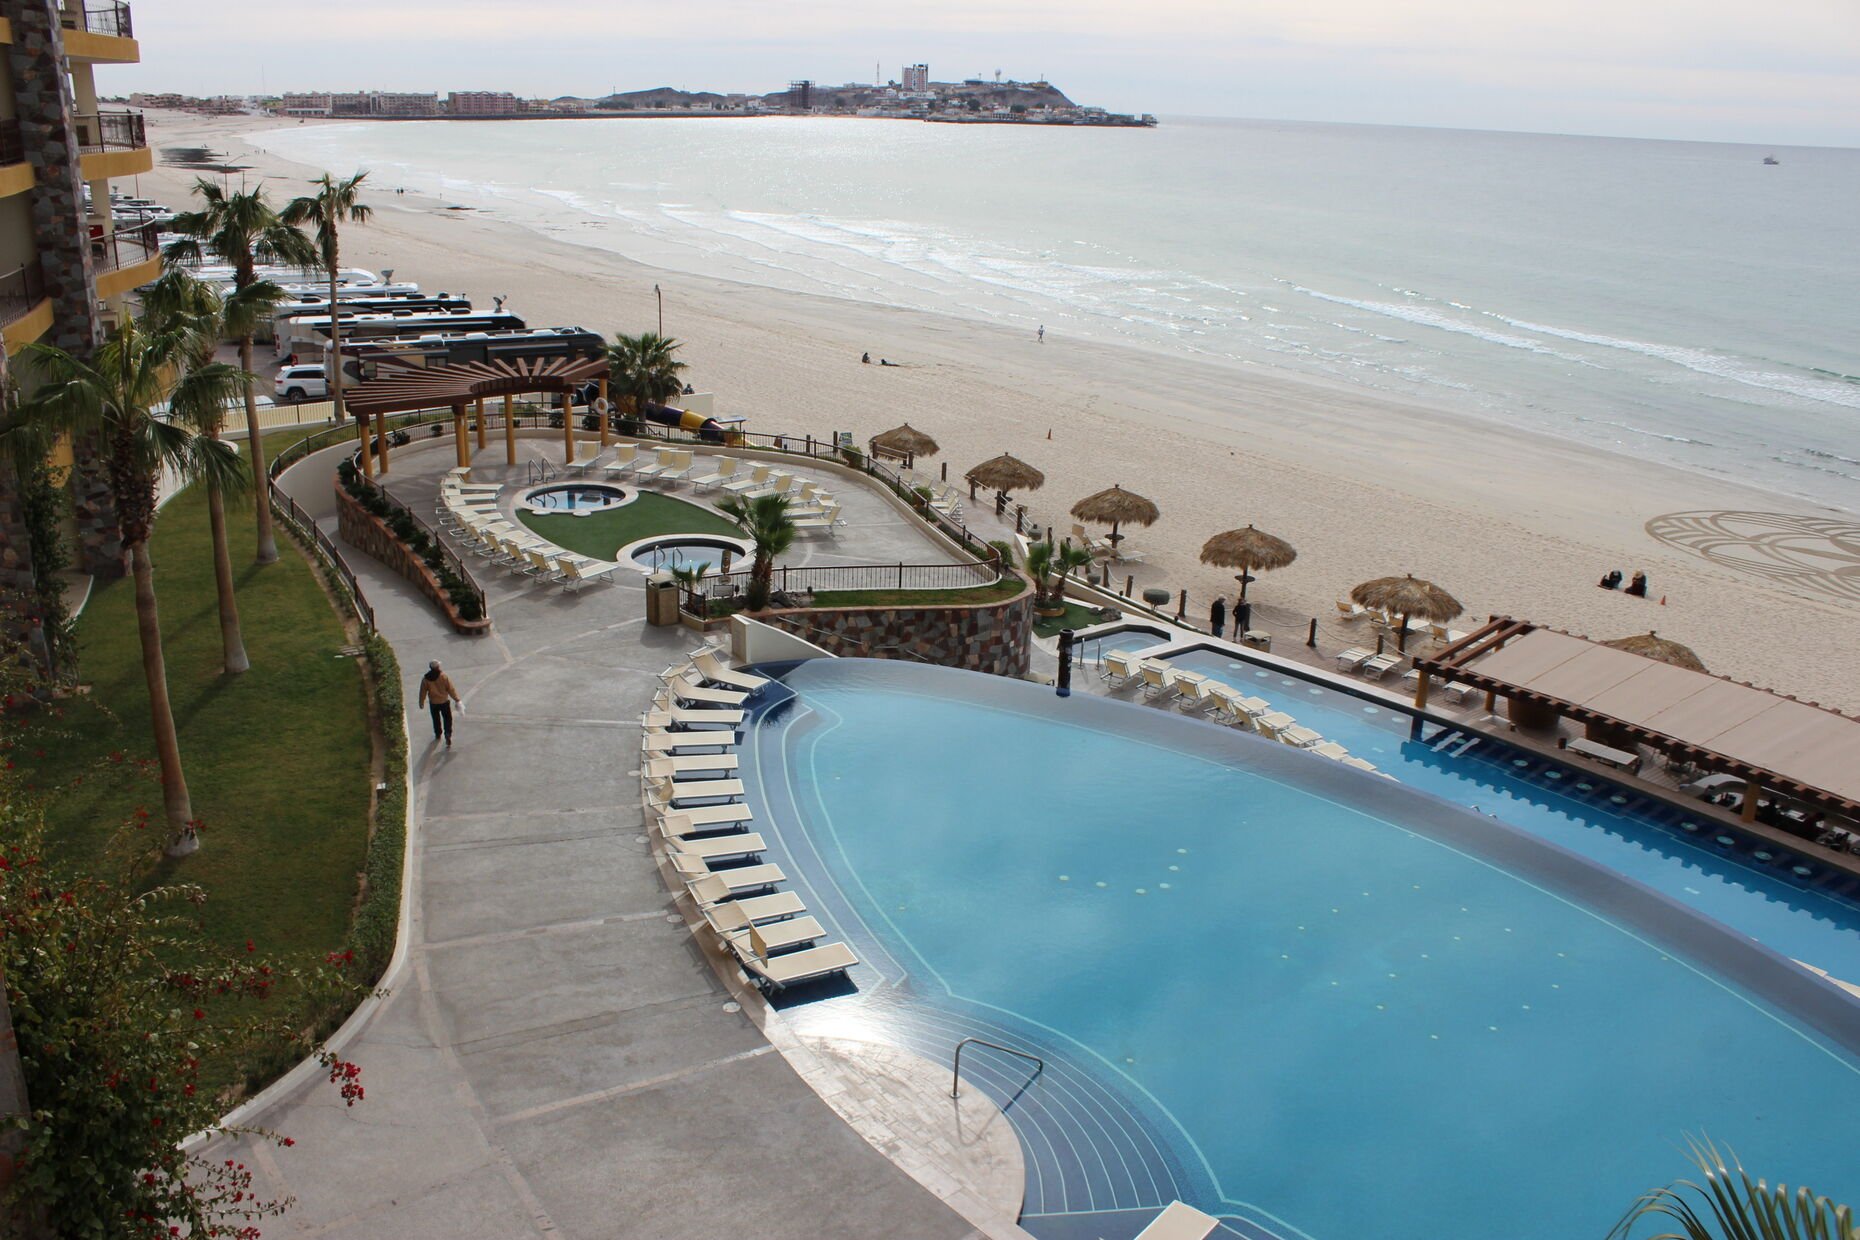 The pool area, view from the upper floors